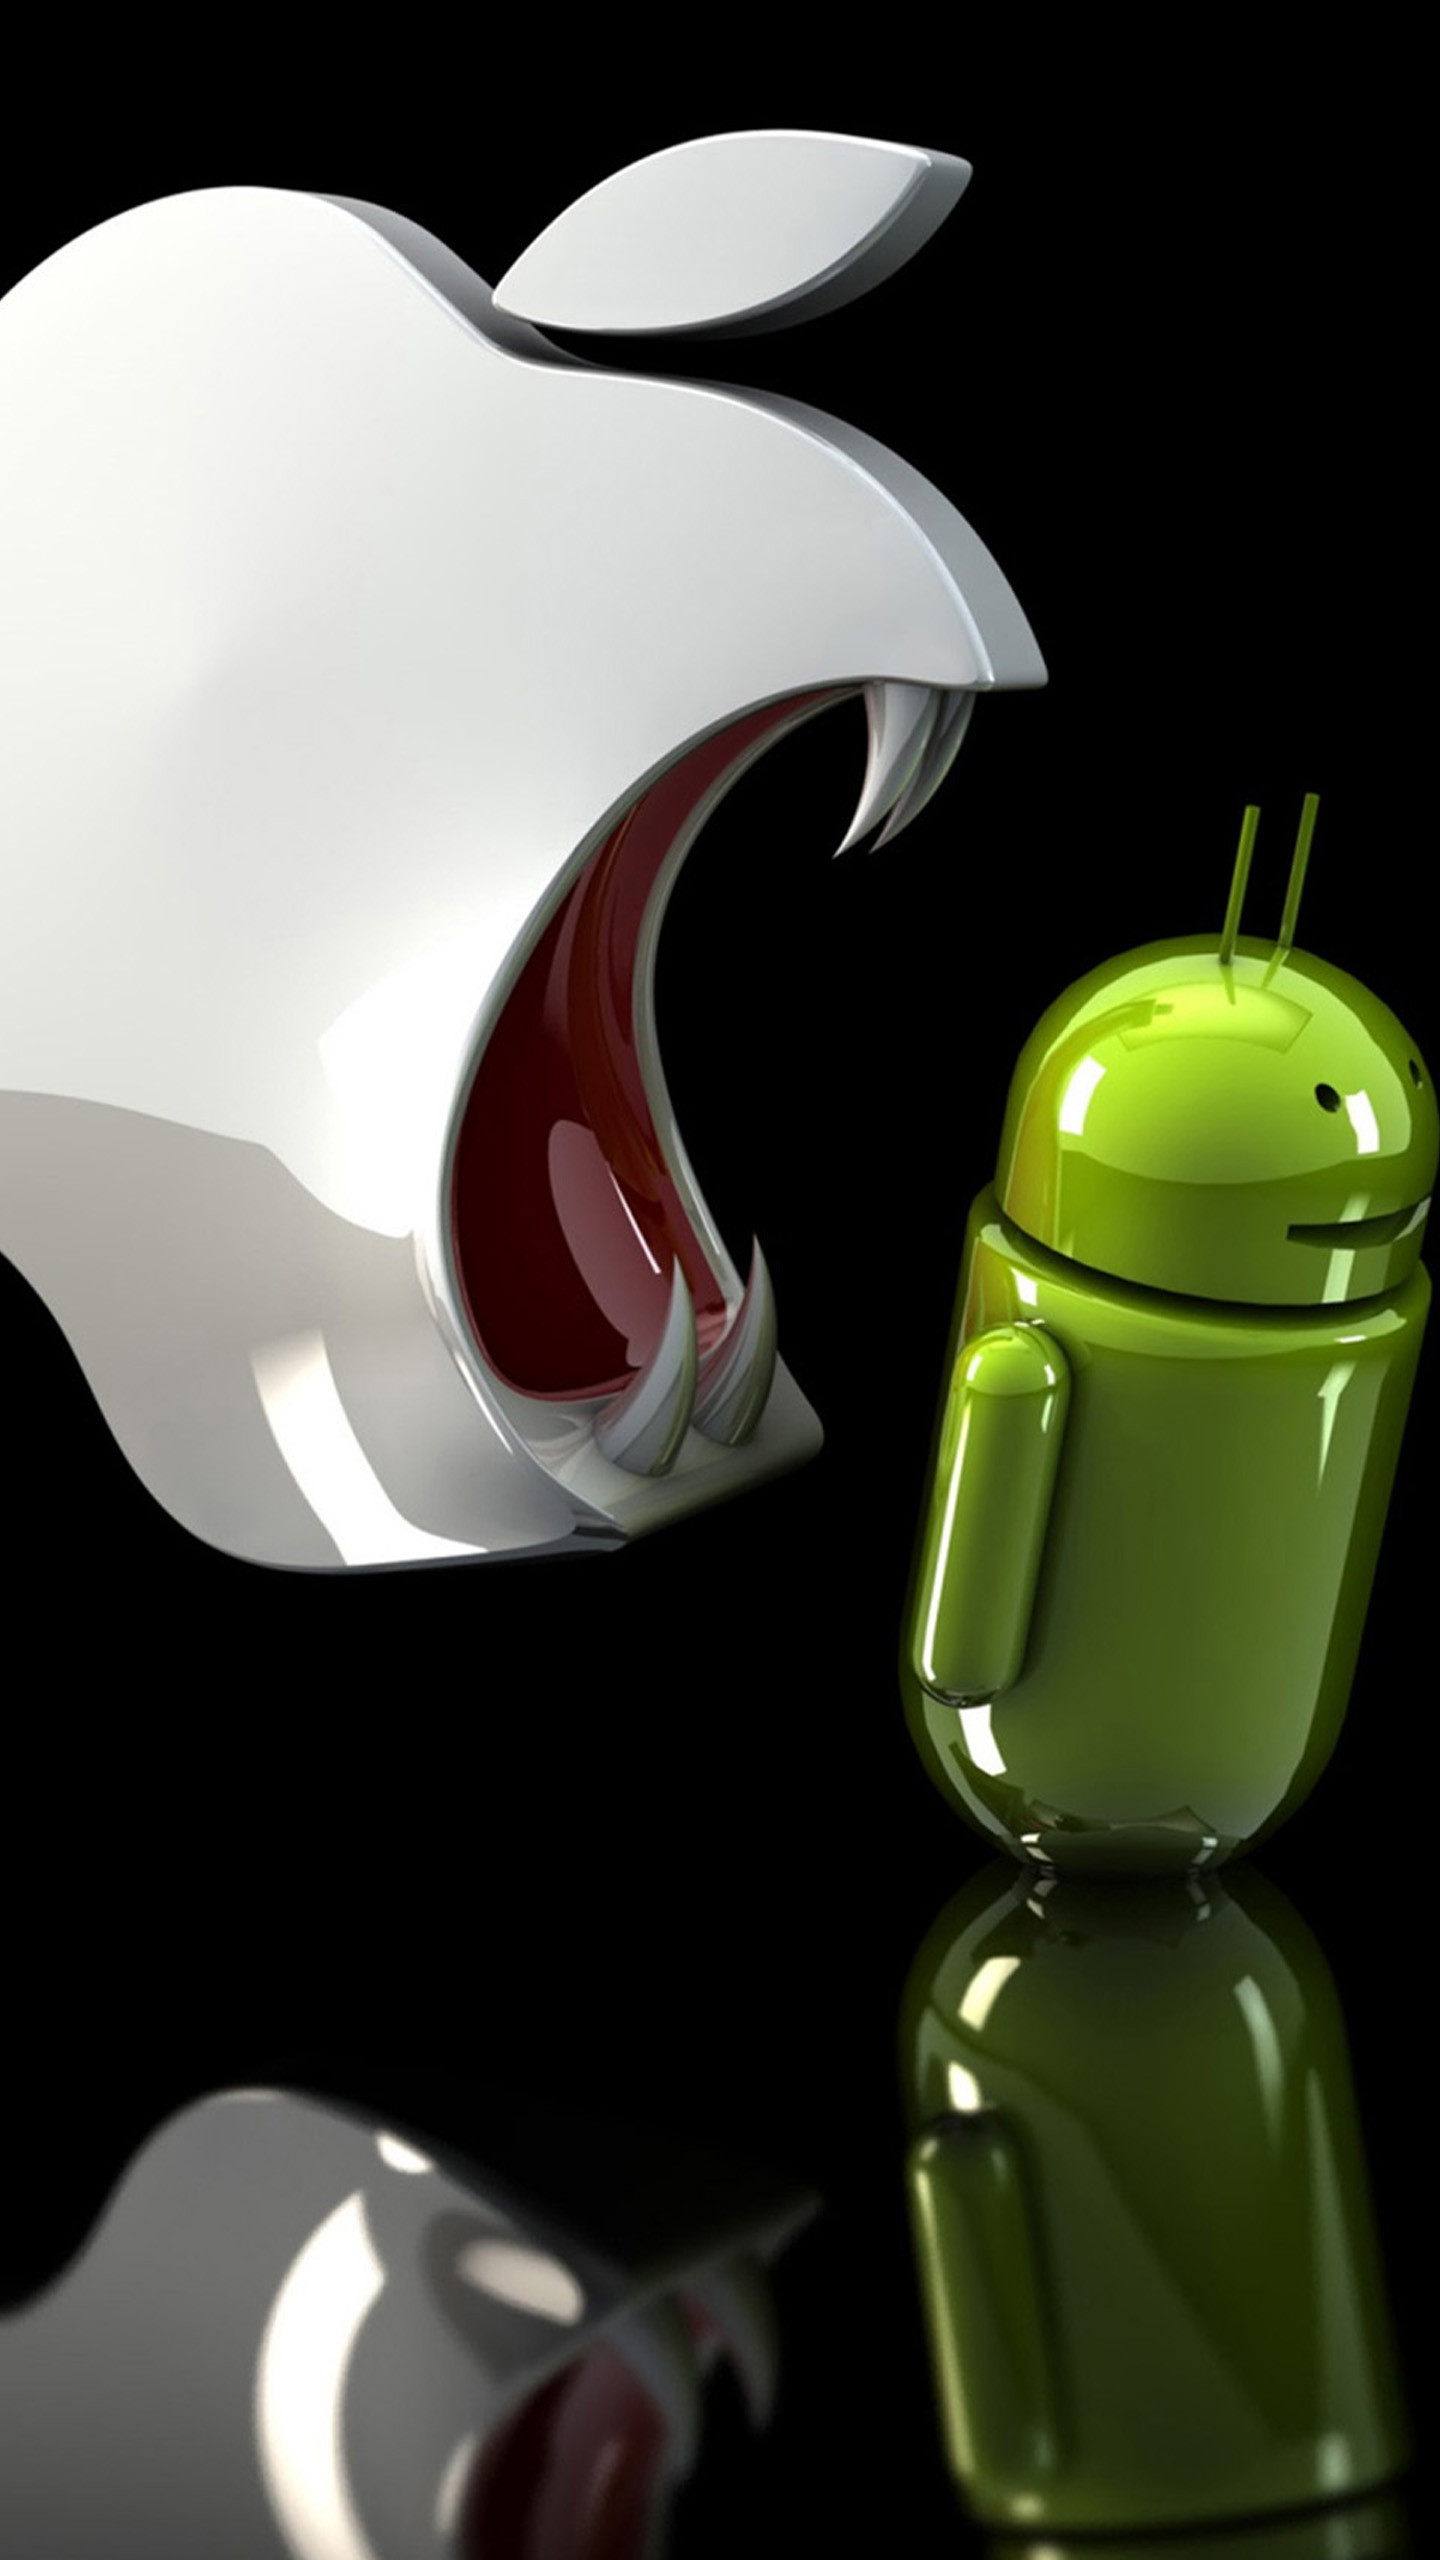 1440x2560 Vicious Apple Logo Eating Android Wallpaper